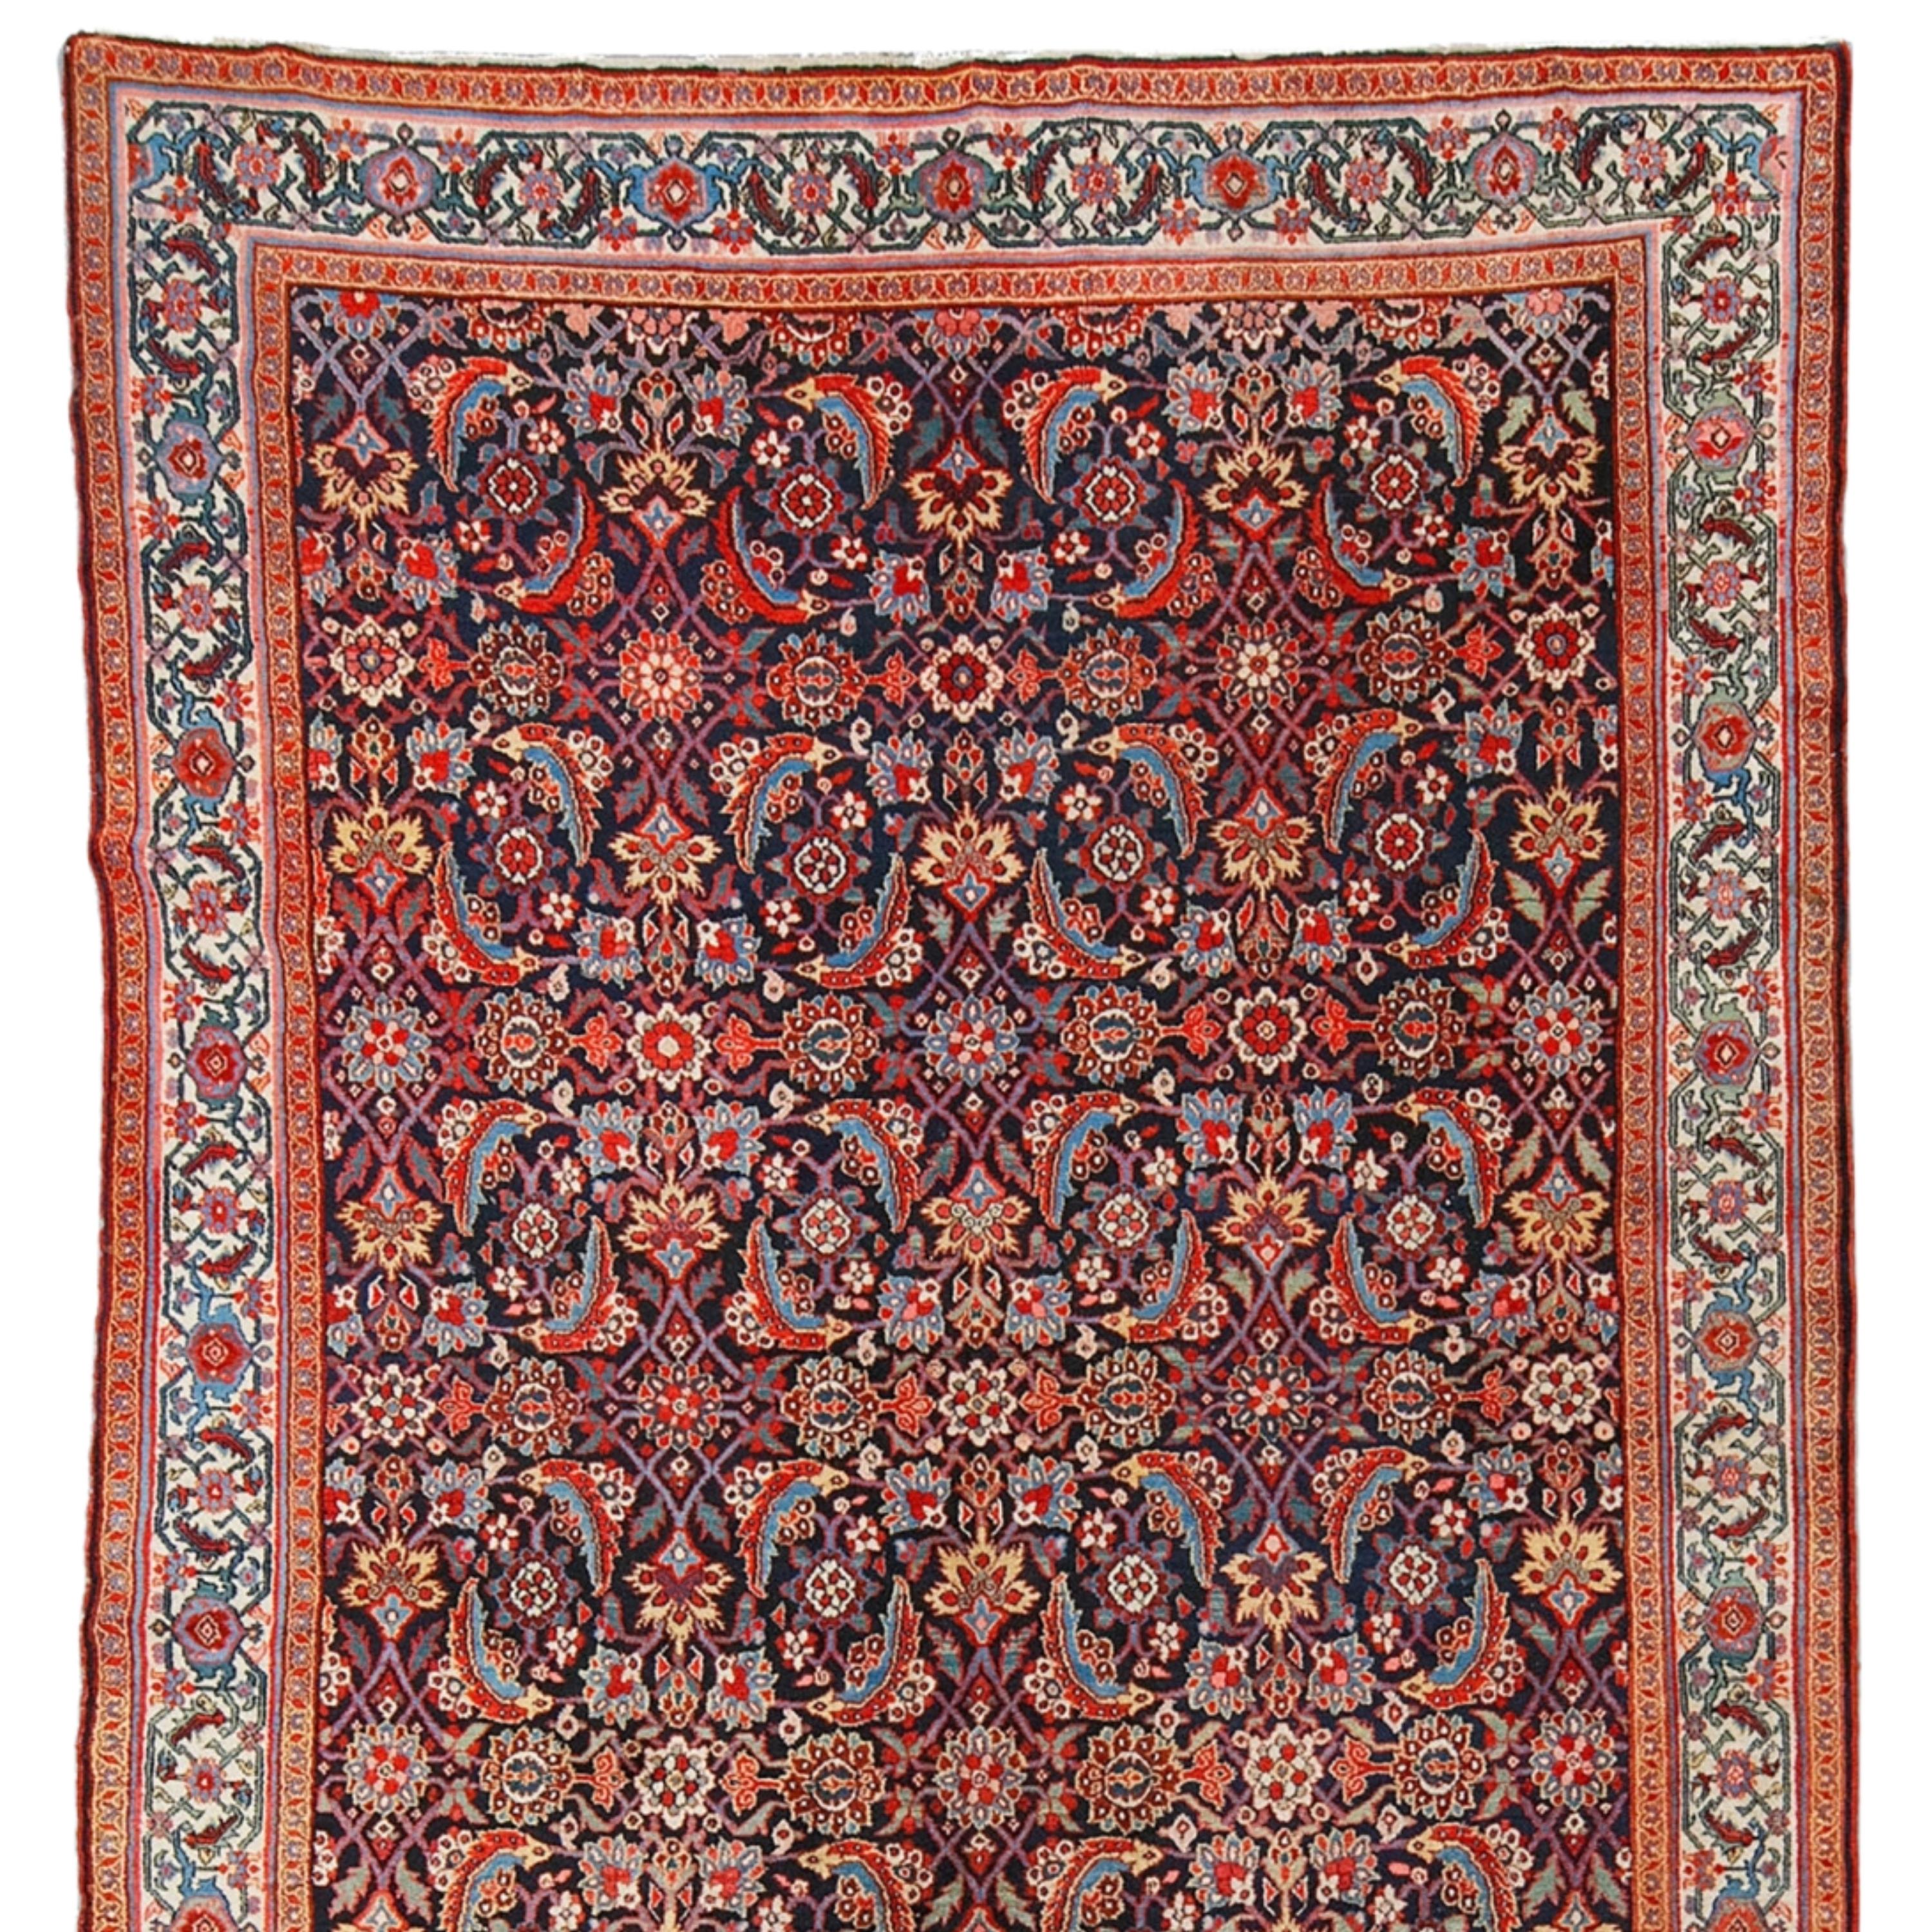 This magnificent antique Sarap rug is a work of art woven in the late 19th century. In every inch you can see the delicate and artistic touch of its period. Intricate patterns and vibrant colors reflect the quality and care of this rug, which has